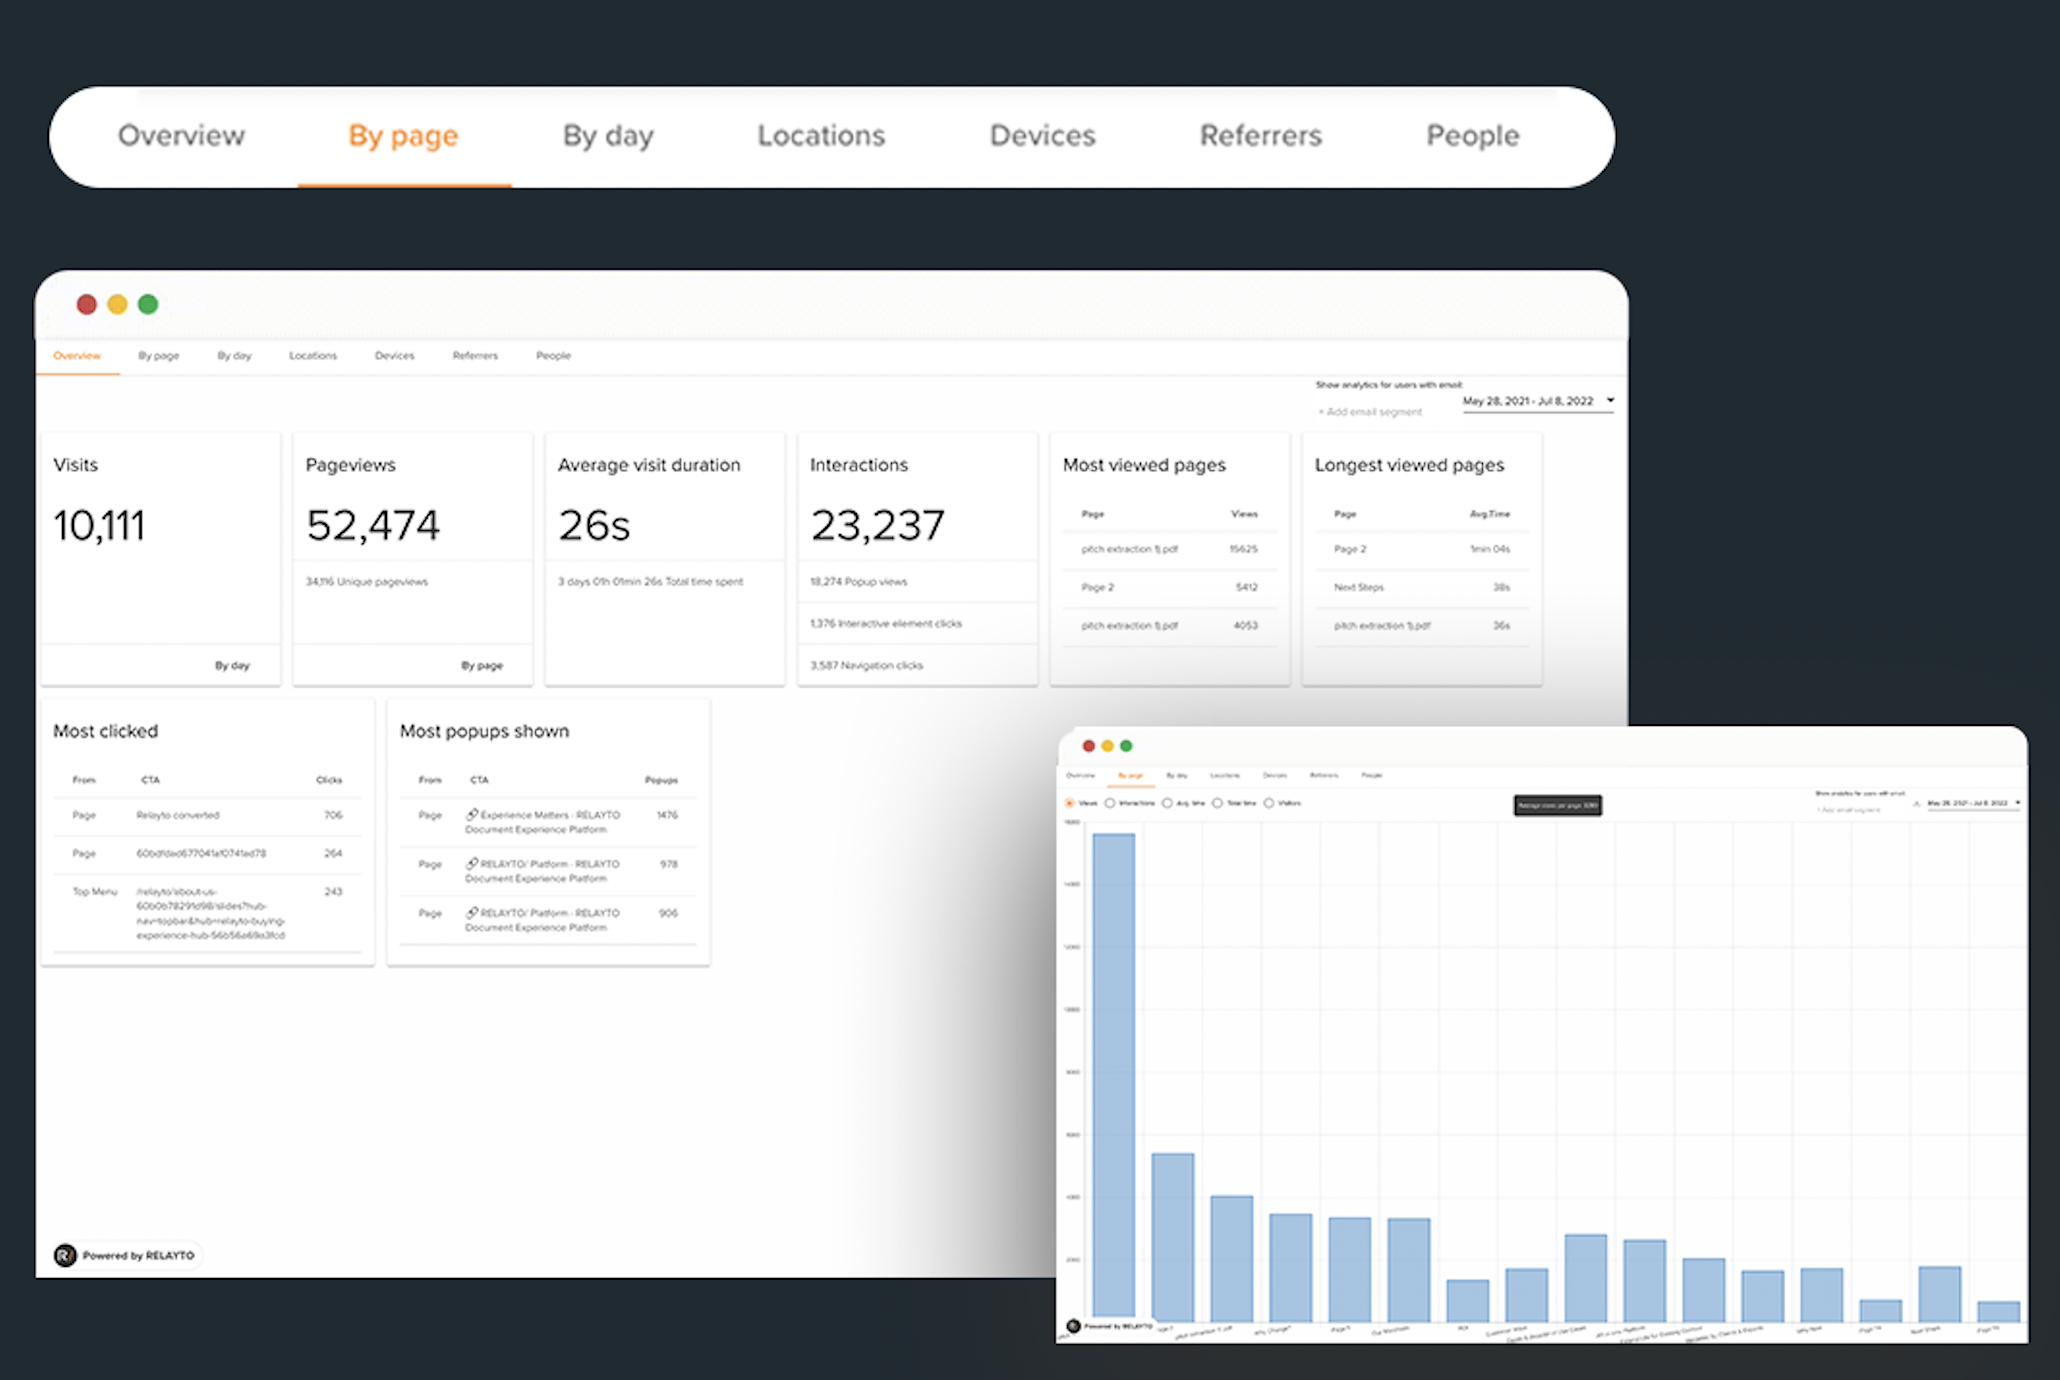 RELAYTO's analytics provide a general overview of how the experience is performing, which includes information on the number of visits, returning visitors & average visit duration.